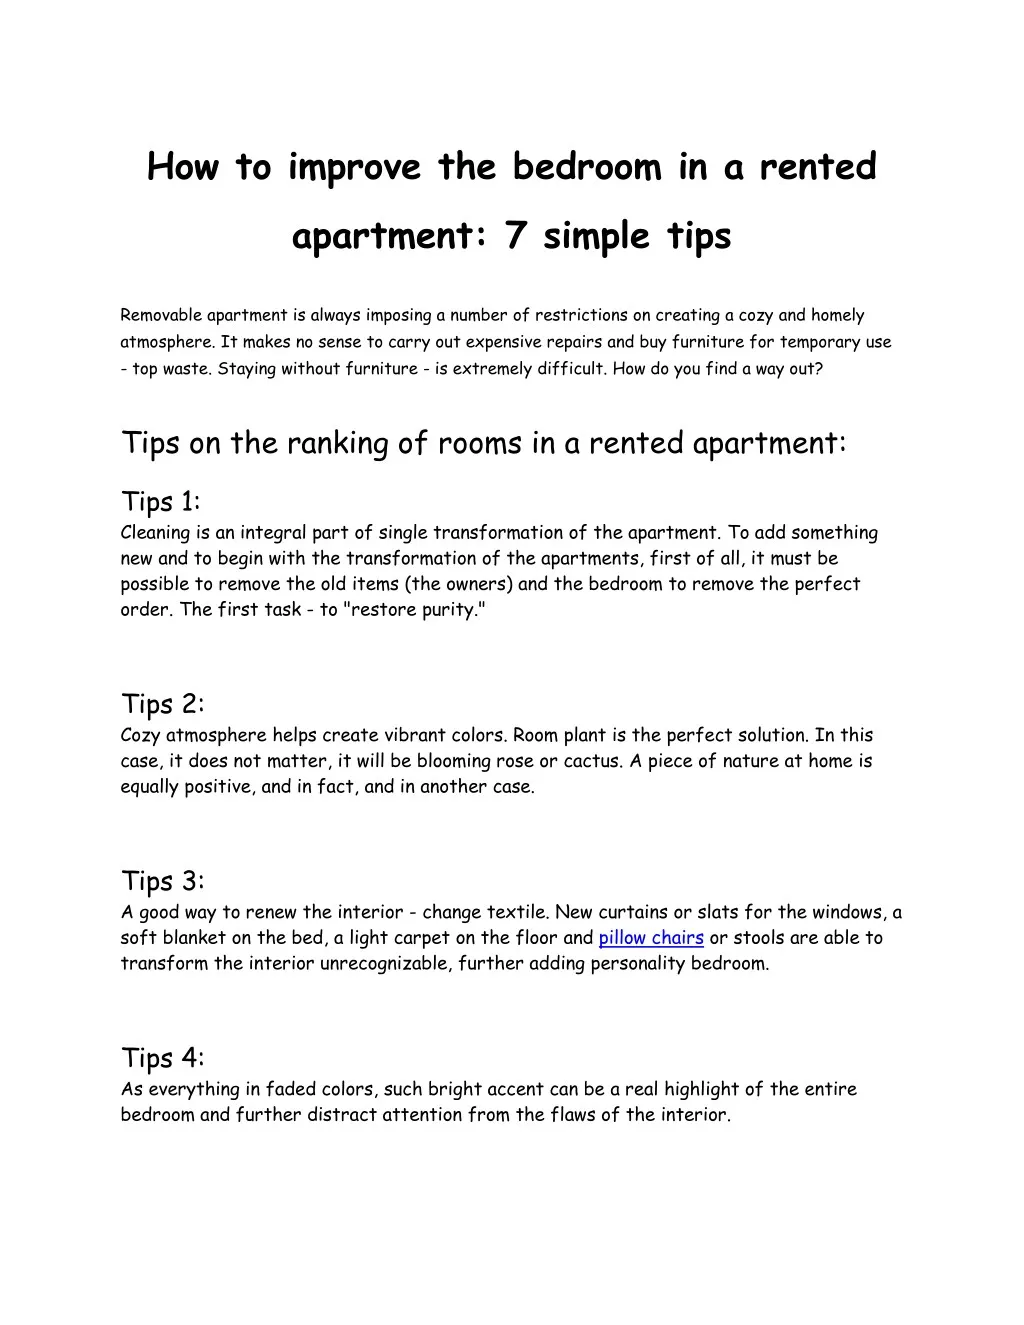 how to improve the bedroom in a rented apartment